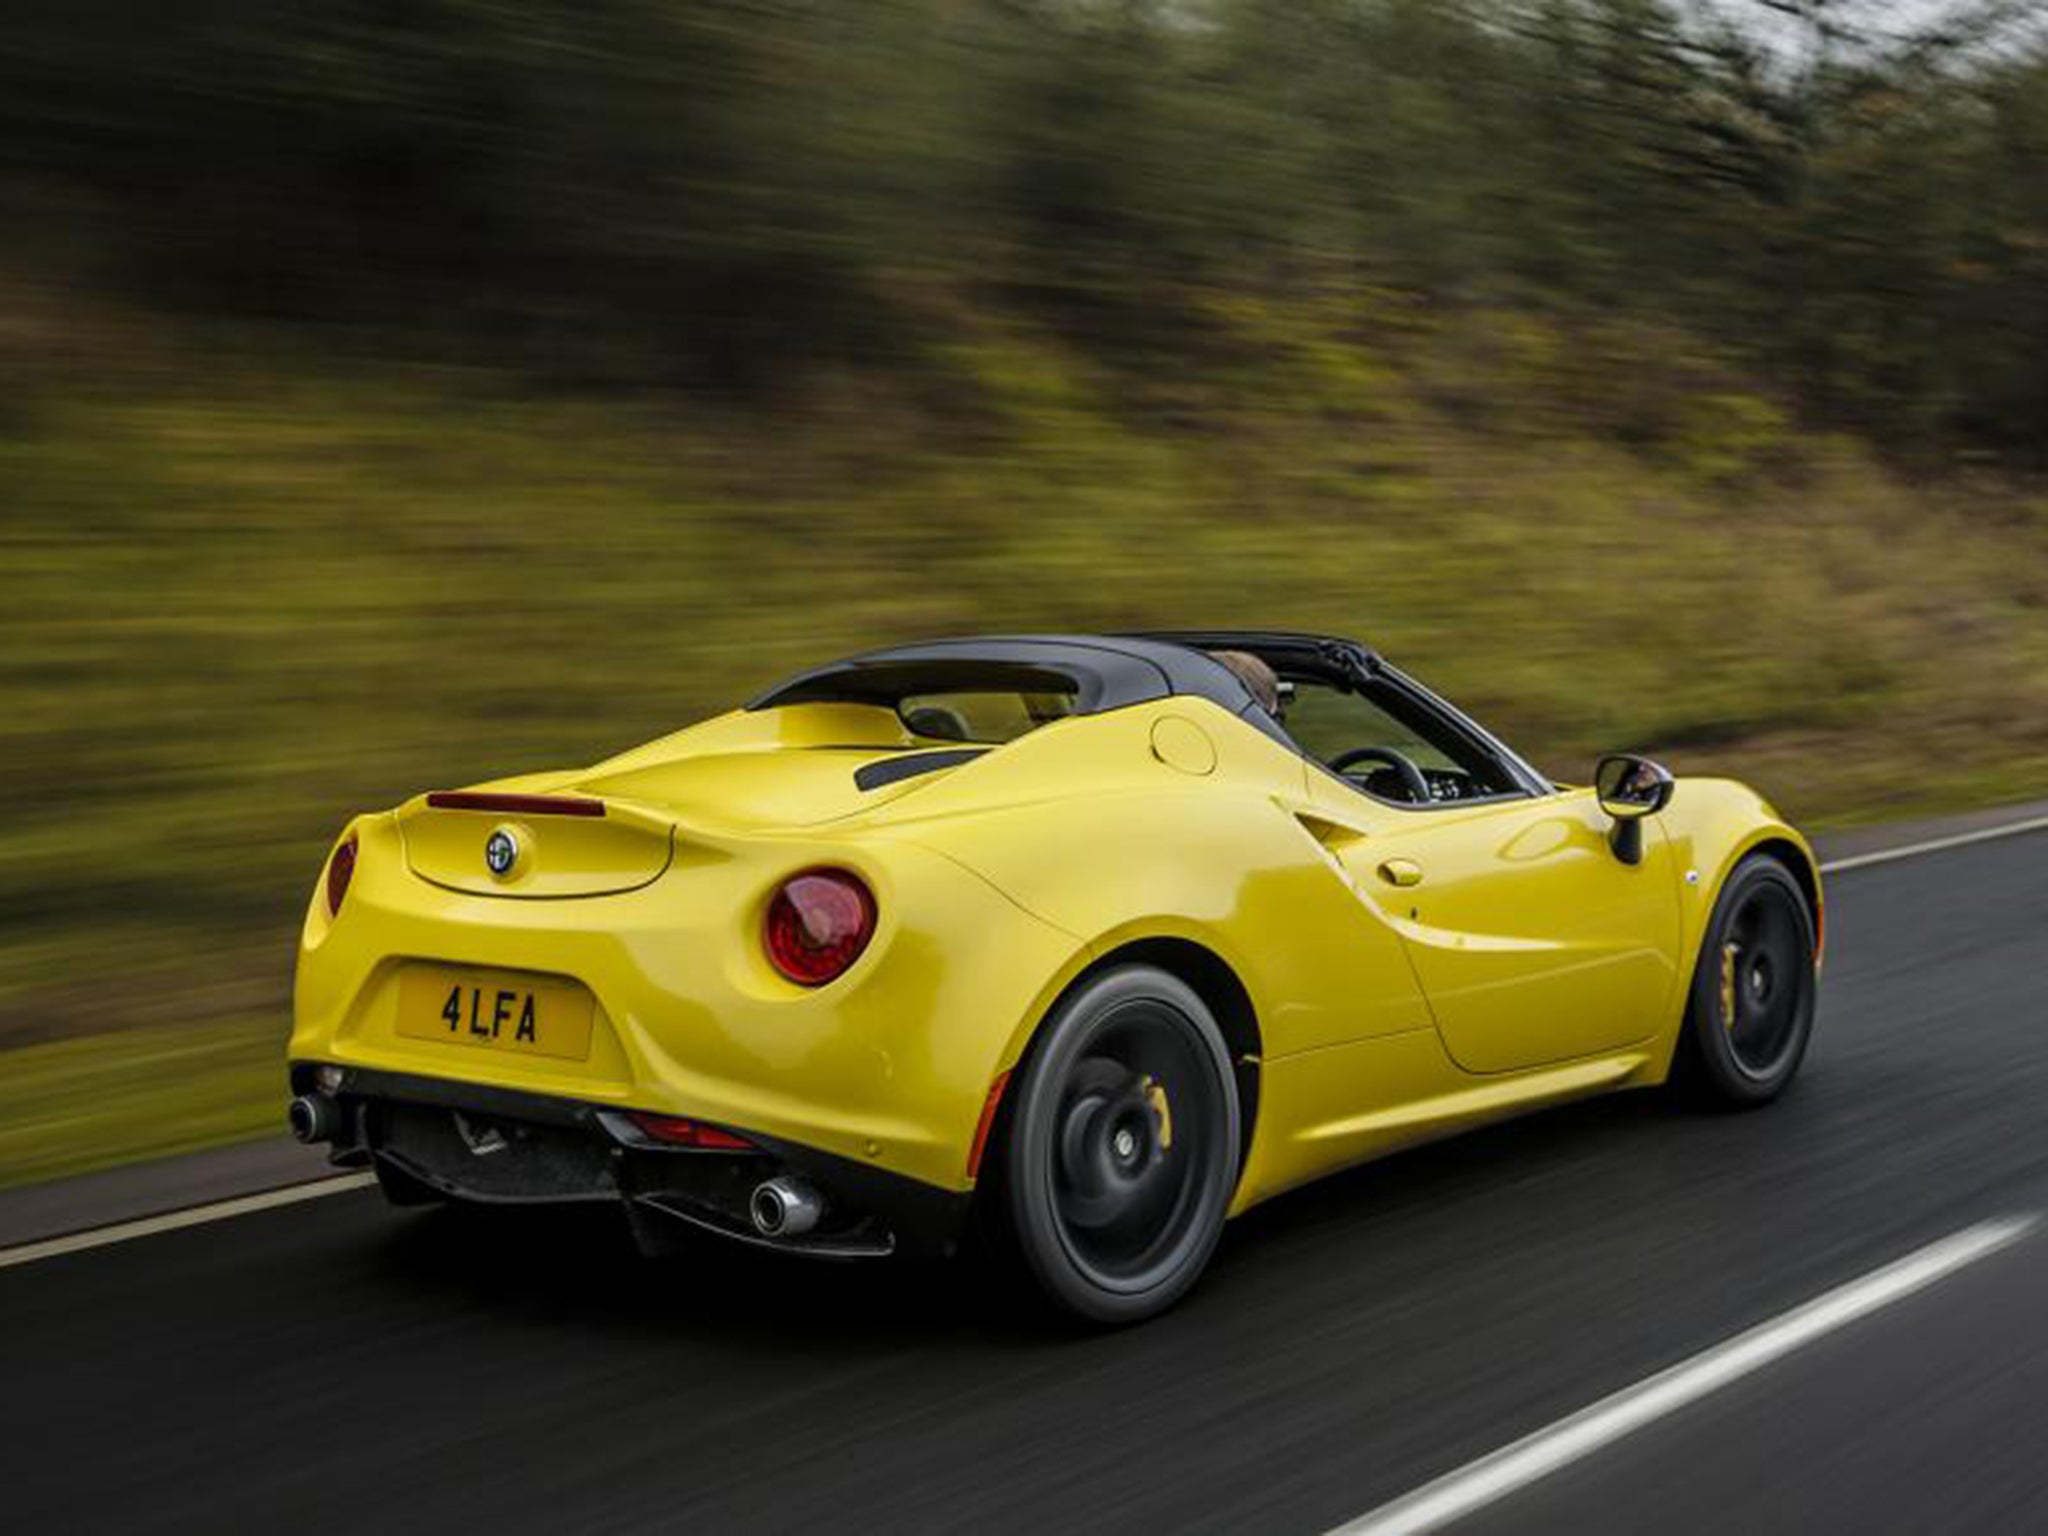 Alfa Romeo 4C Spider, car review: Flawed steering means it can't justify  extravagant pricing | The Independent | The Independent